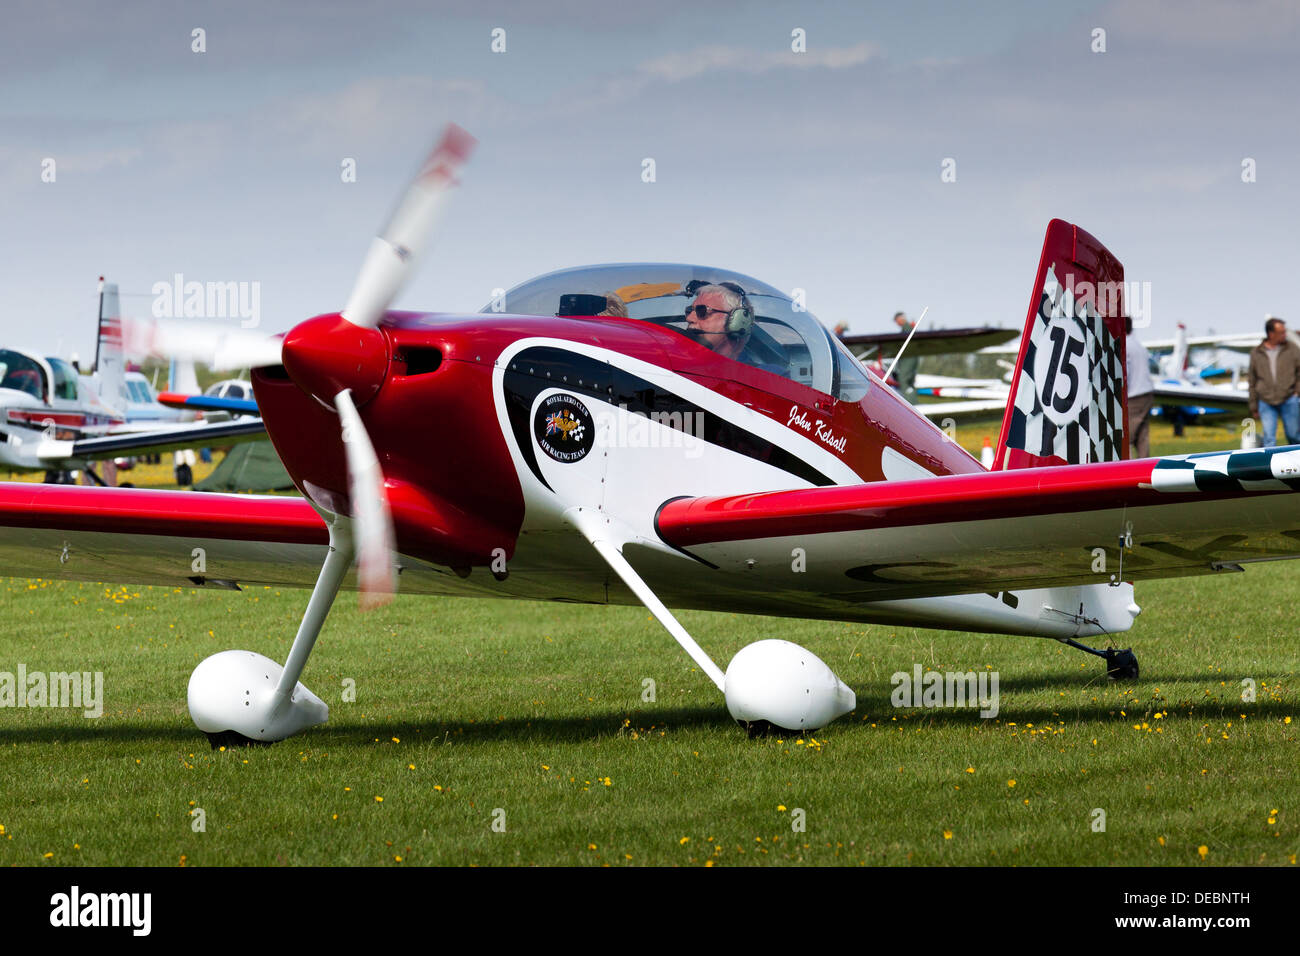 Vans rv7 stock photography and images Alamy